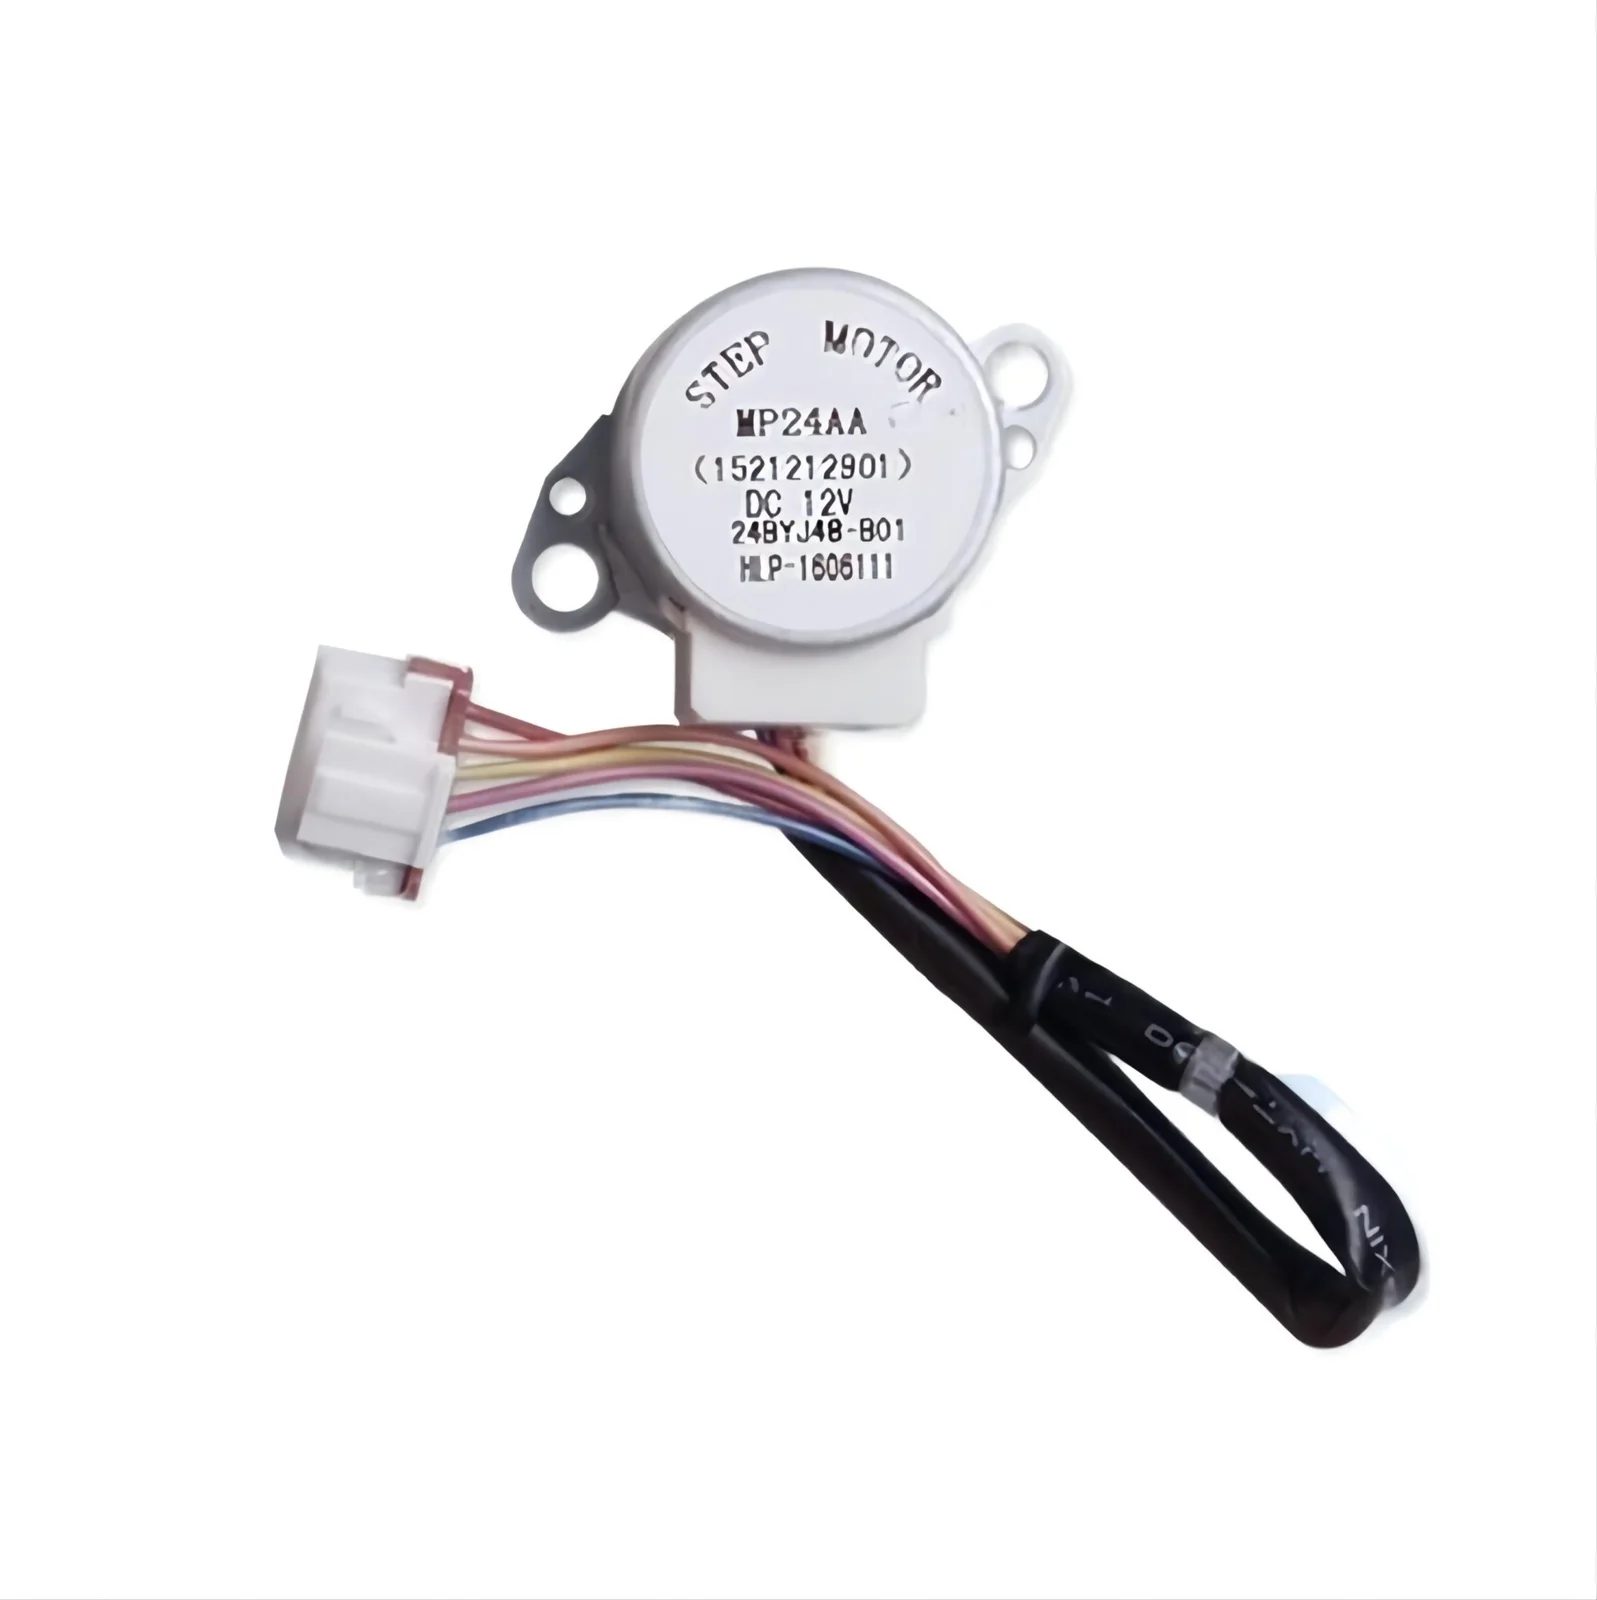 

Air Conditioner Cabinet Motor, Wind Guide Motor, Sweeping Wind Motor, MP24AA/ MP24AB /MP24AF /MP28EA /MP35AA /SM008 /SM014 Motor